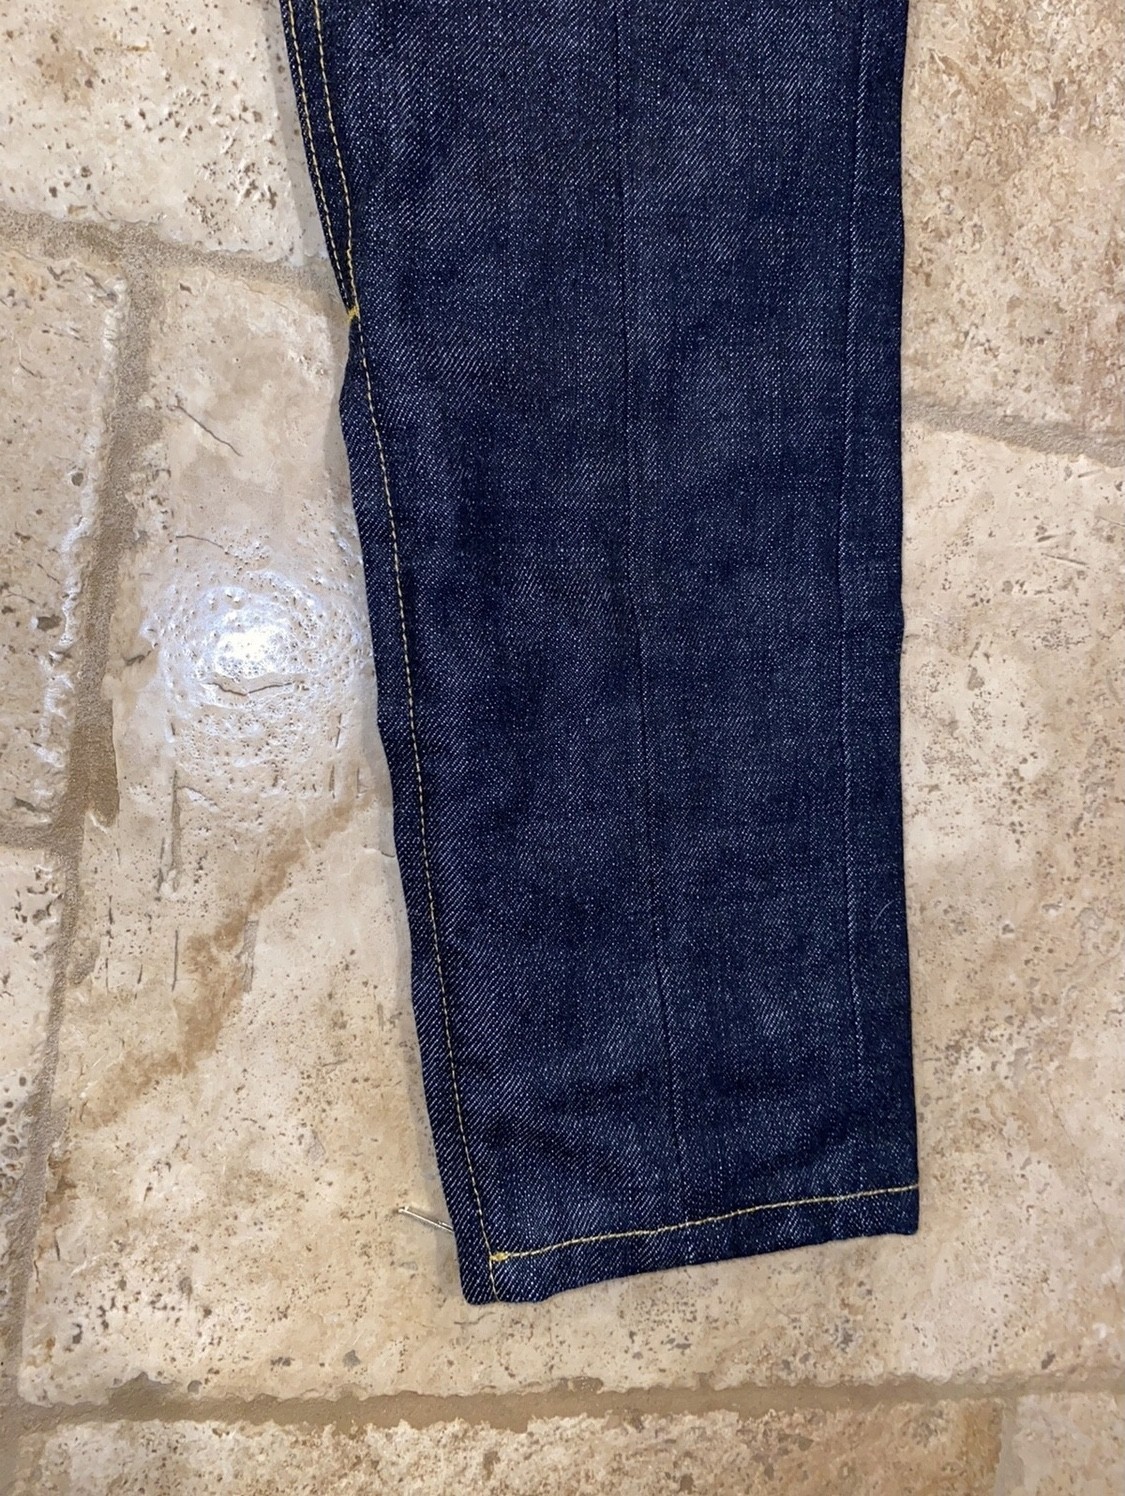 Fear of God Jeans Fifth Collection Paneled Raw Selvedge 34 - 4